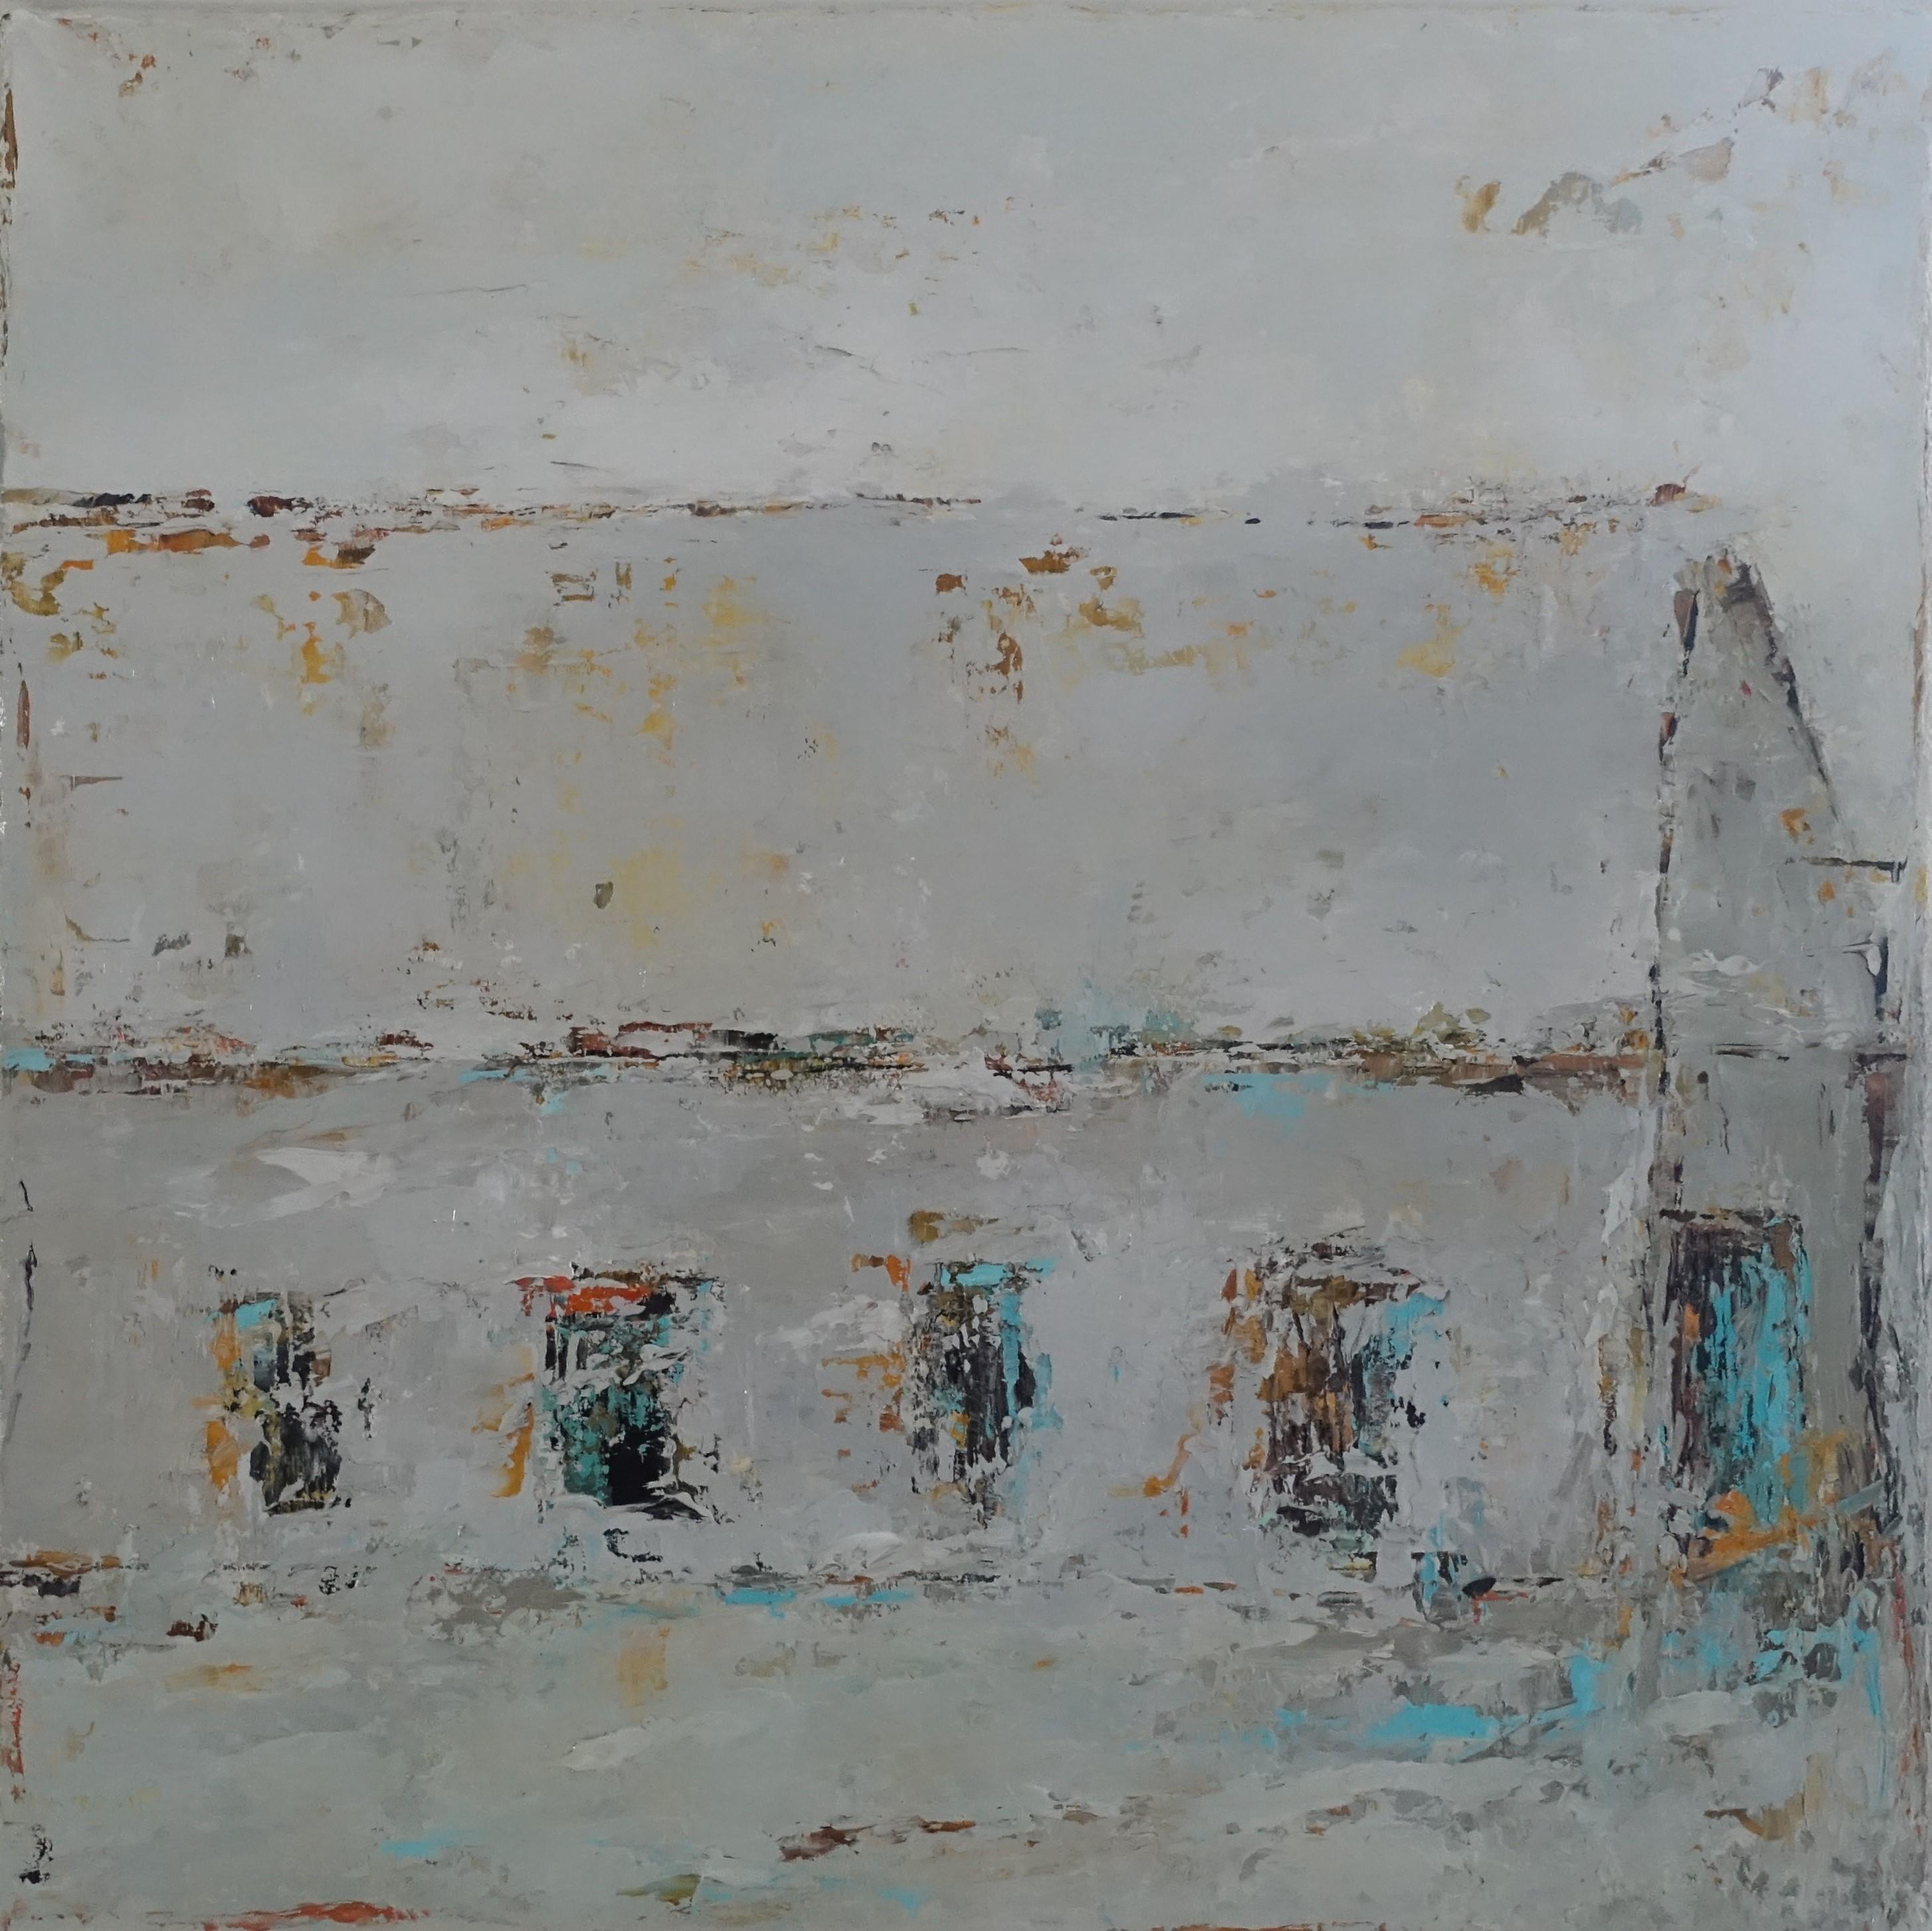 'The Barn II' is a petite framed Impressionist oil on canvas painting of square format created by American artist Geri Eubanks in 2018. Featuring a soft palette mostly made of white, accented with blue, brown and orange strokes, the painting